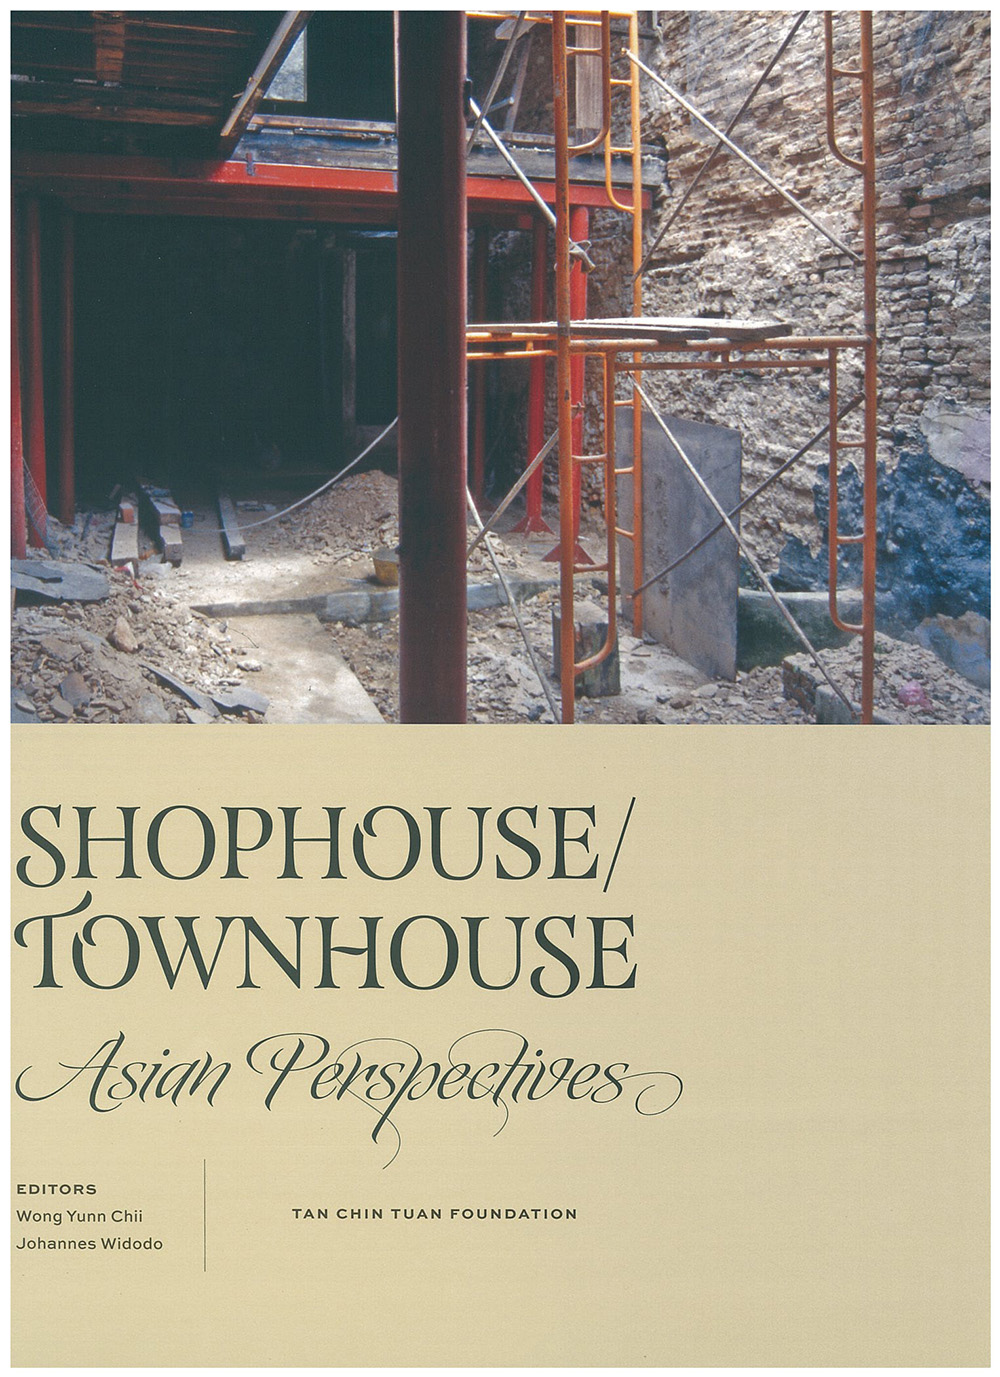 Shophouse / Townhouse – Asian Perspectives